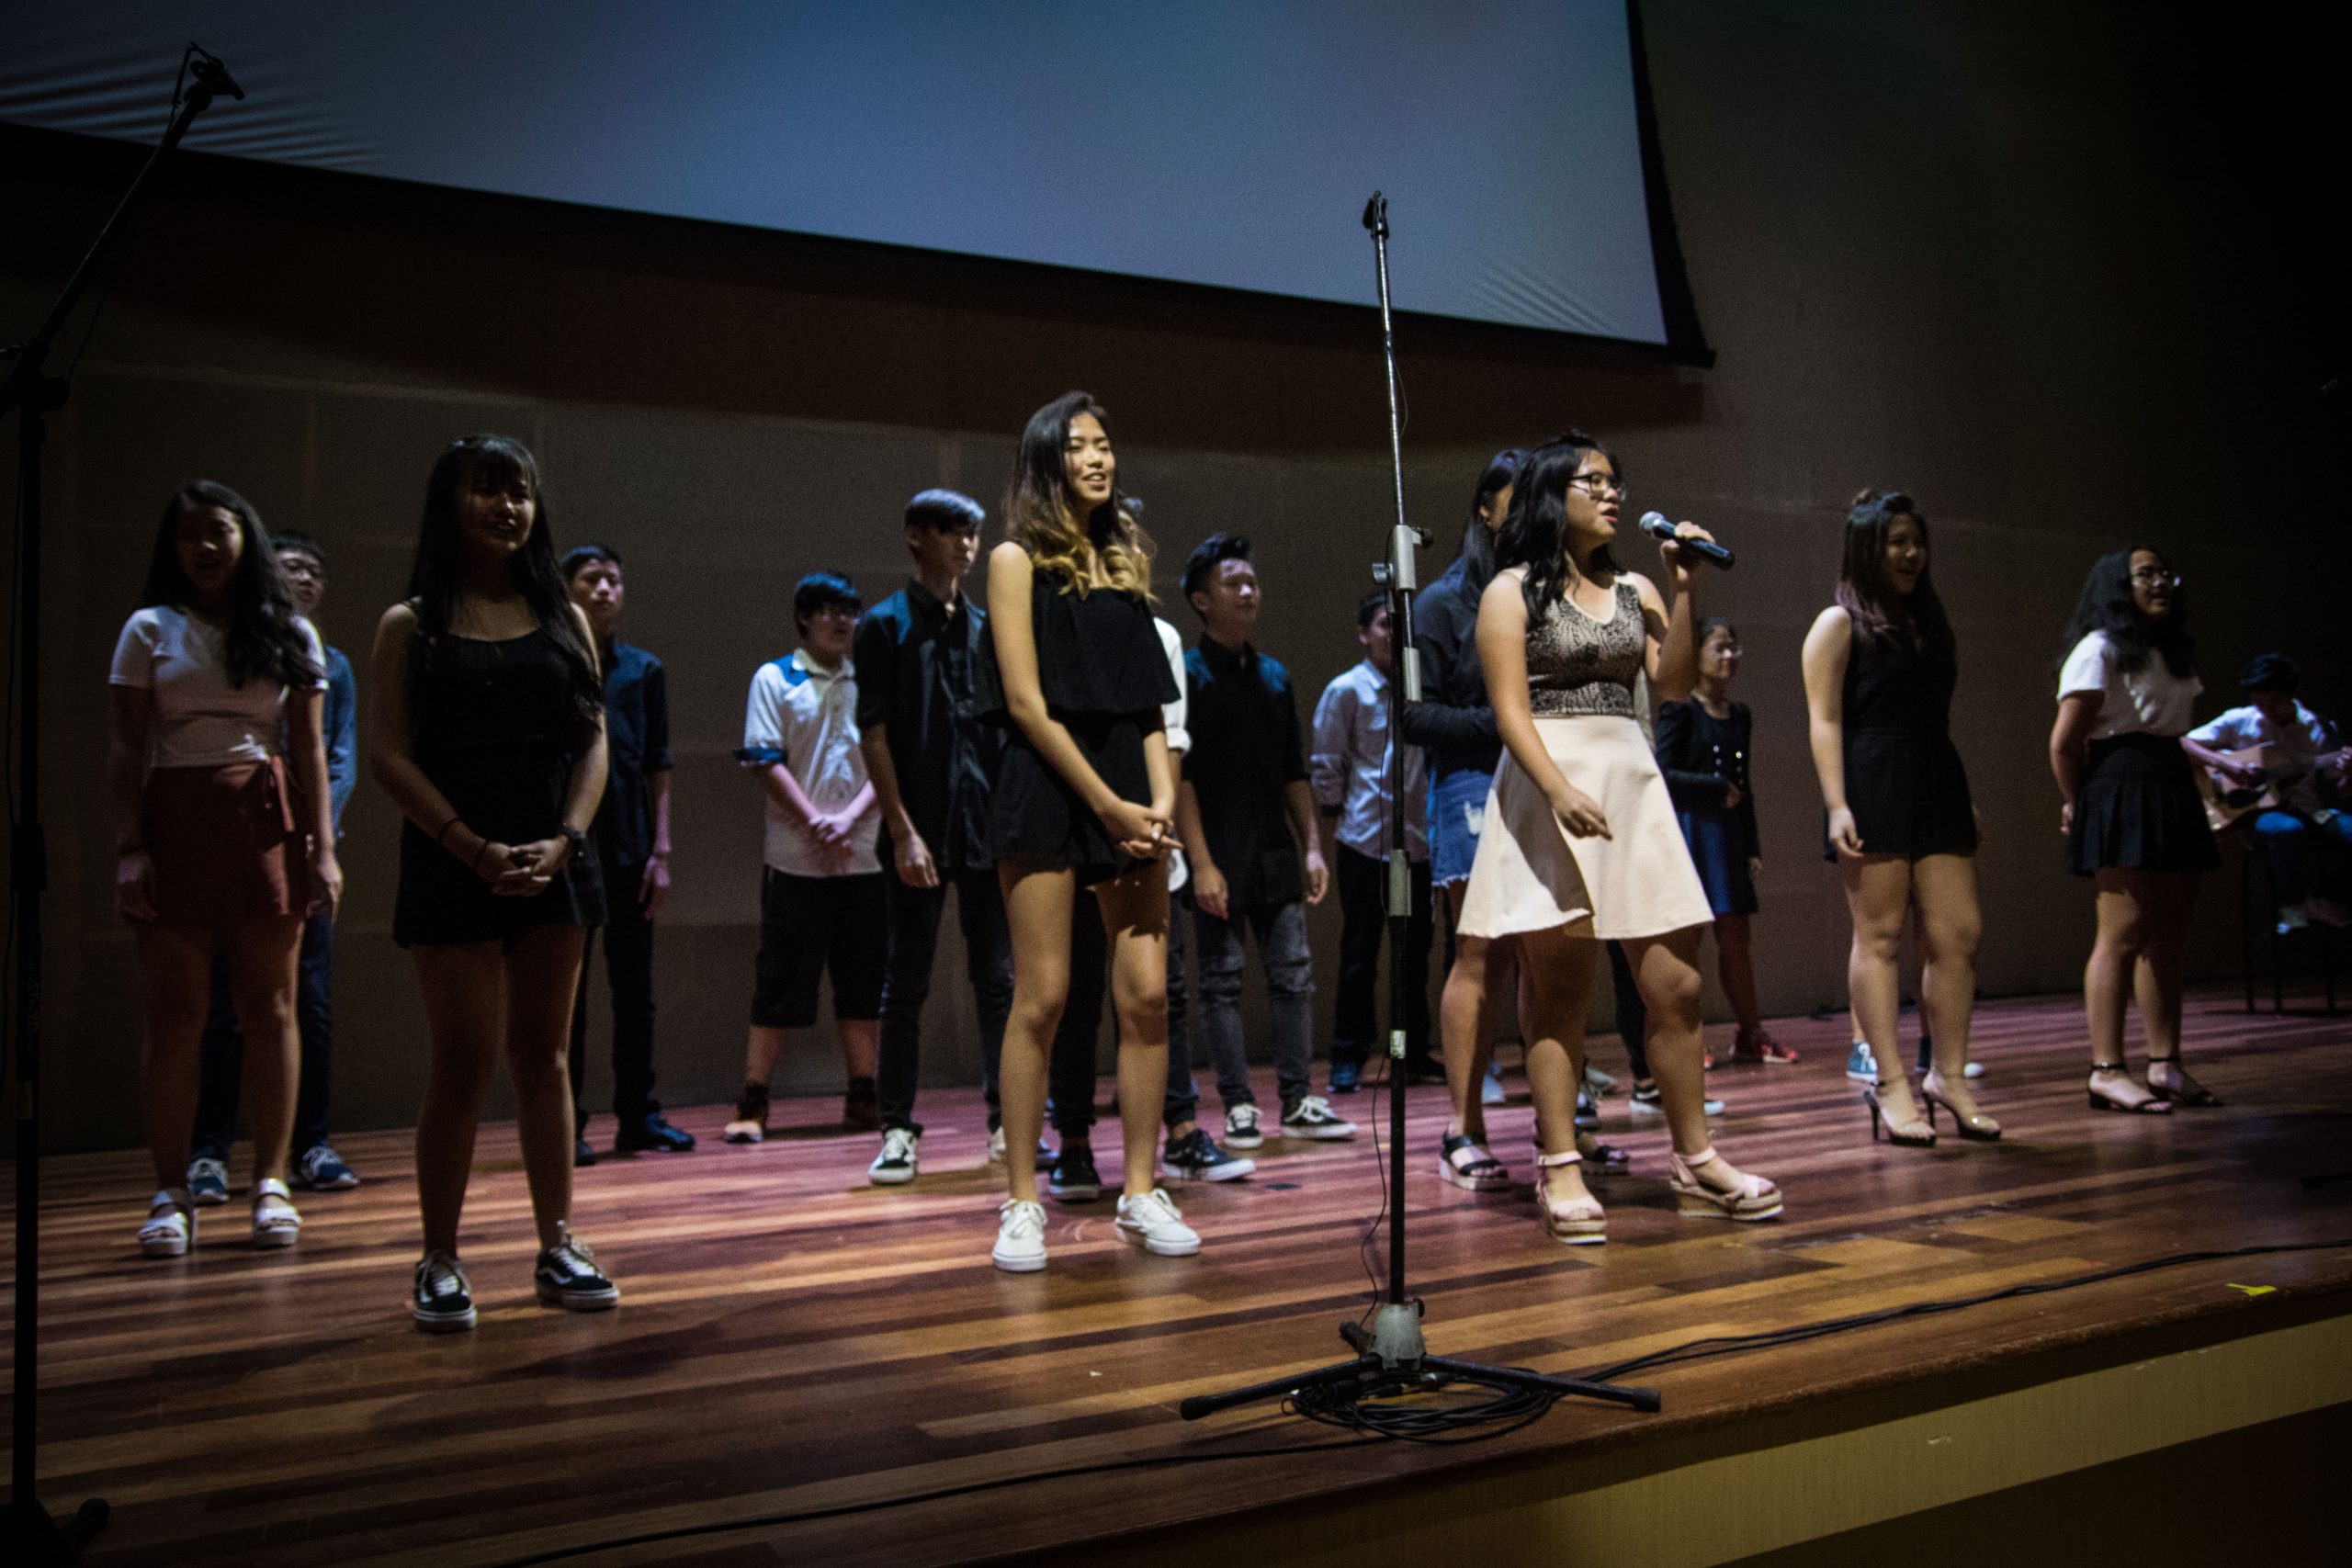 Students from vocal class performing on stage in Sri Emas International School.